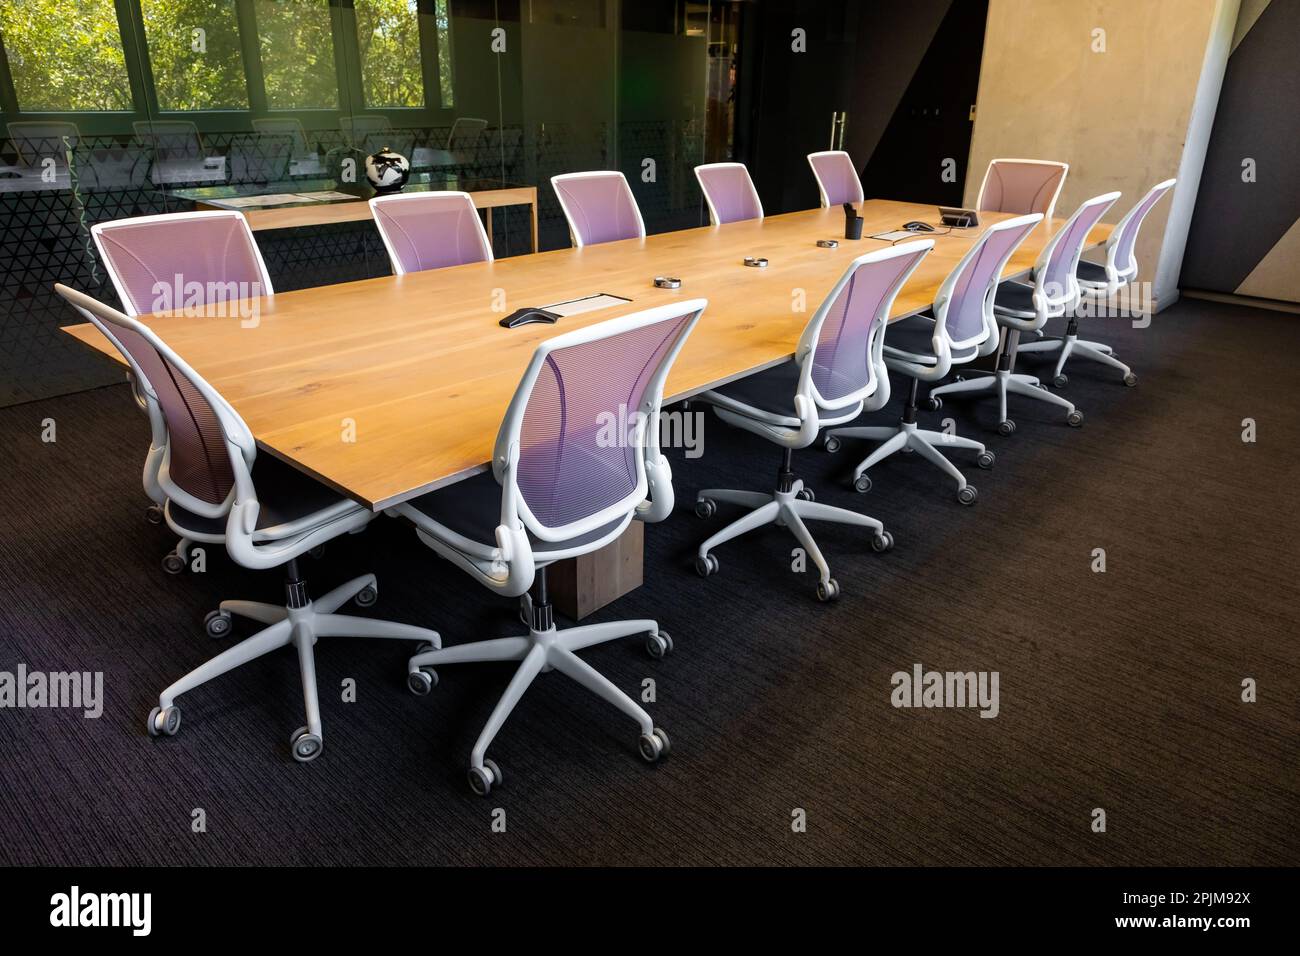 Empty executive boardroom with wooden table and fancy chairs on wheels Stock Photo